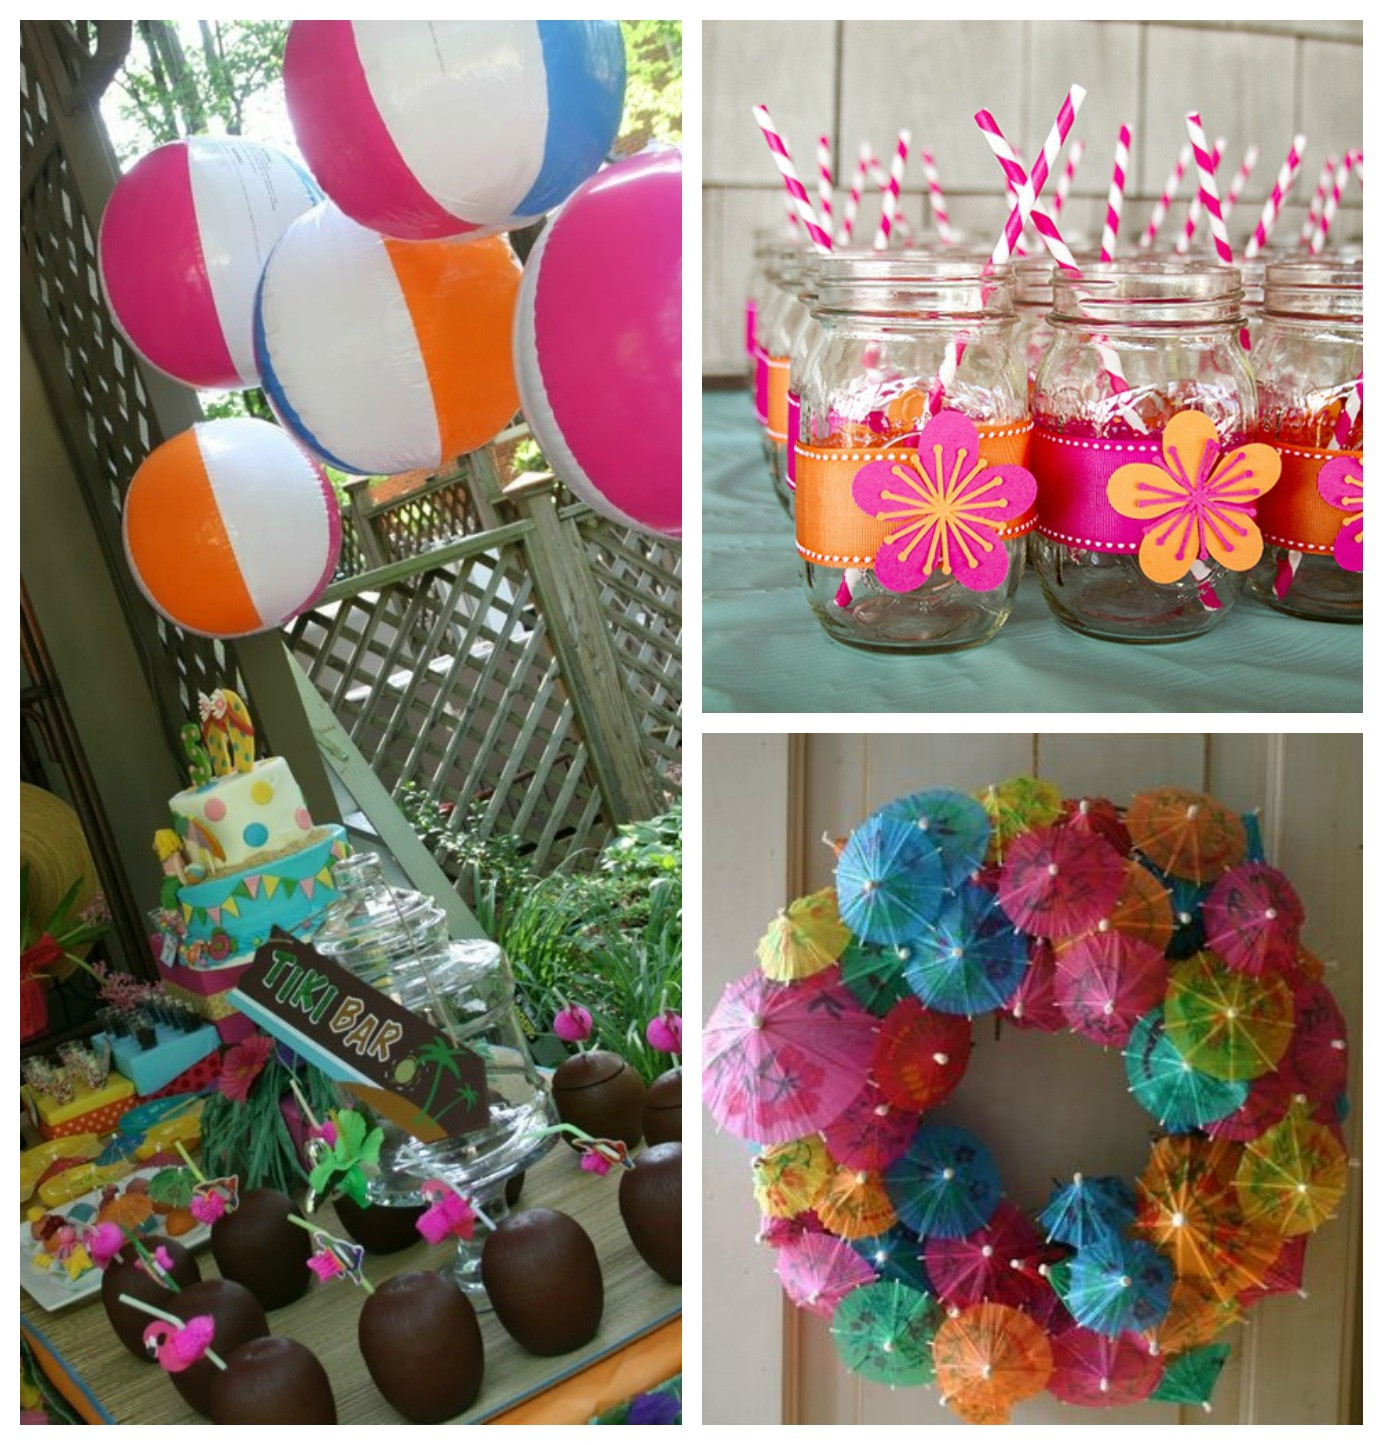 Pool Party Ideas Pinterest
 Small Town Life Lauren s Bridal Shower Inspiration